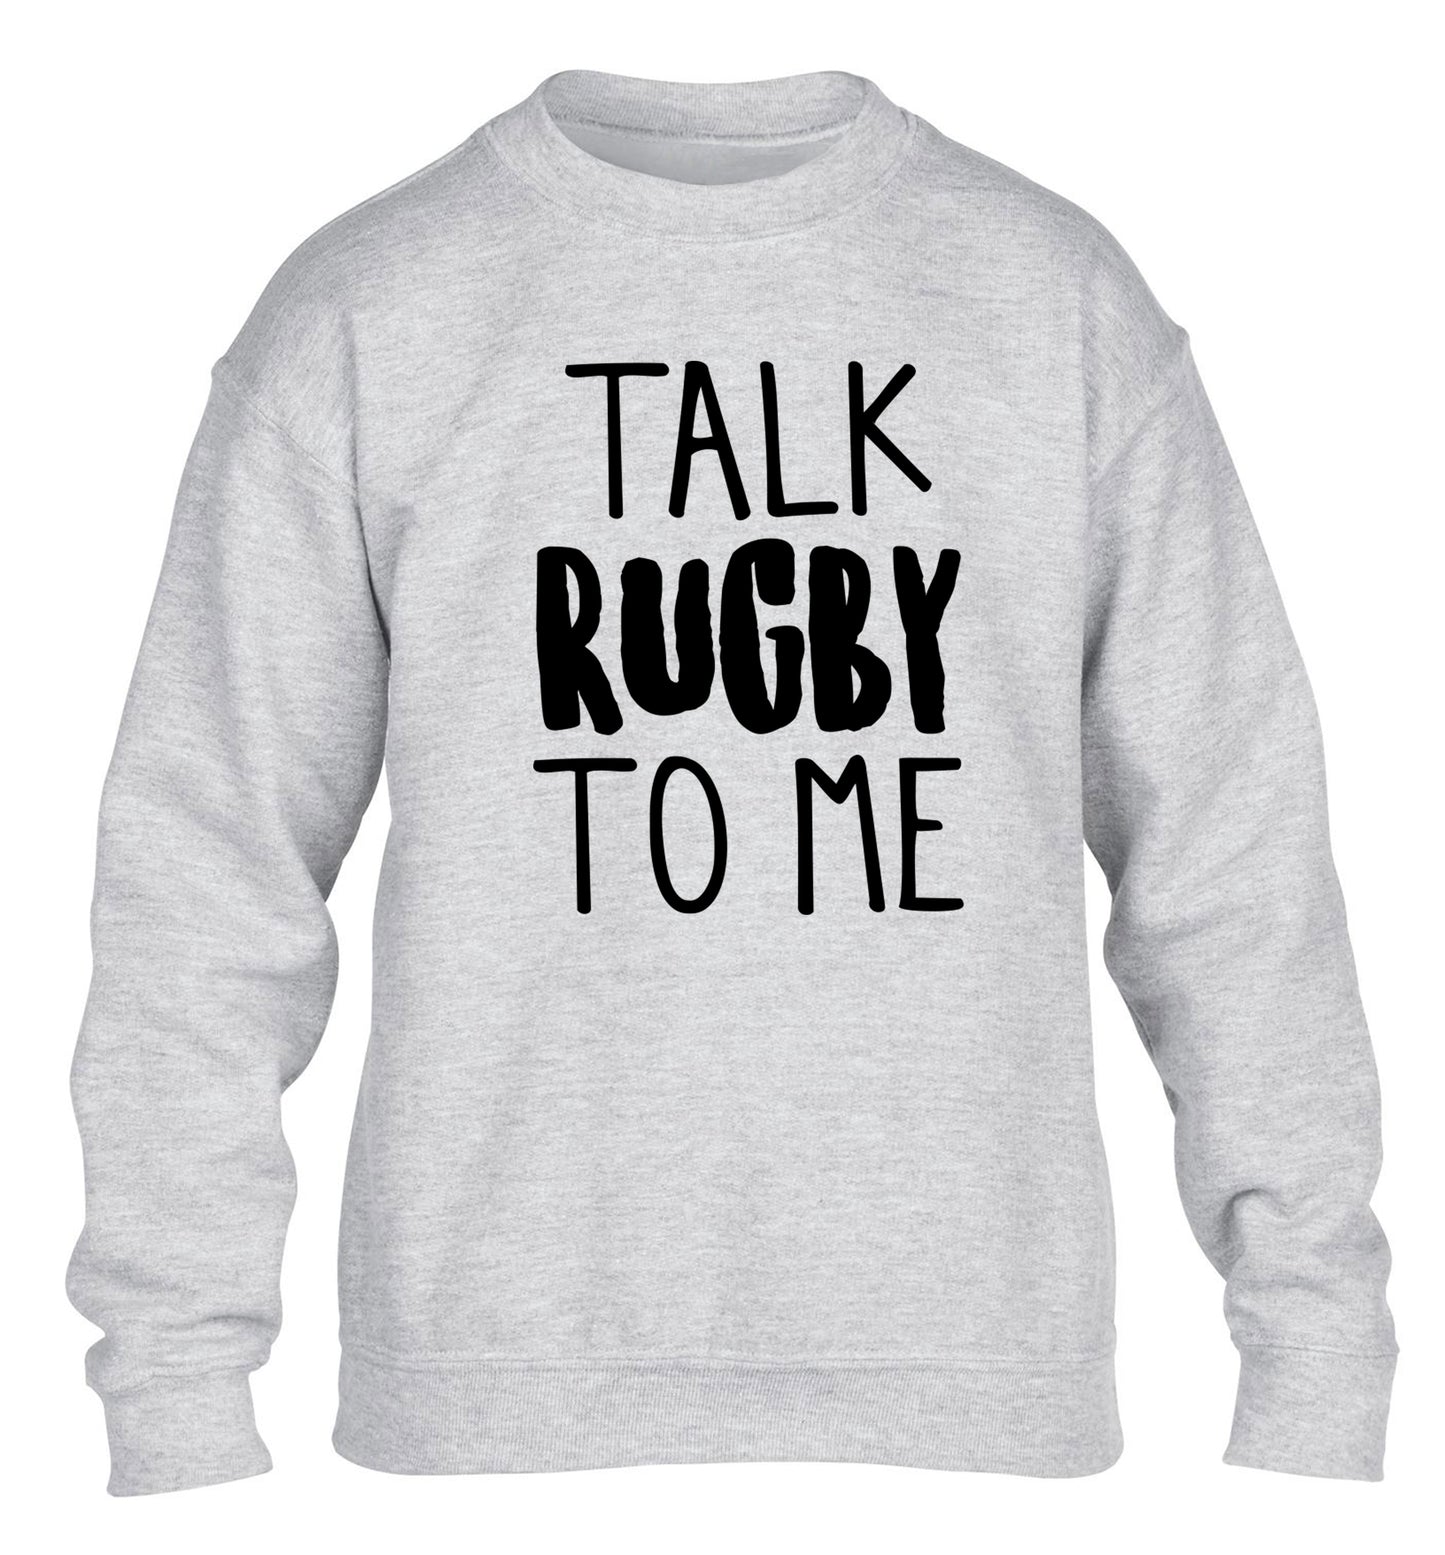 Talk rugby to me children's grey sweater 12-13 Years